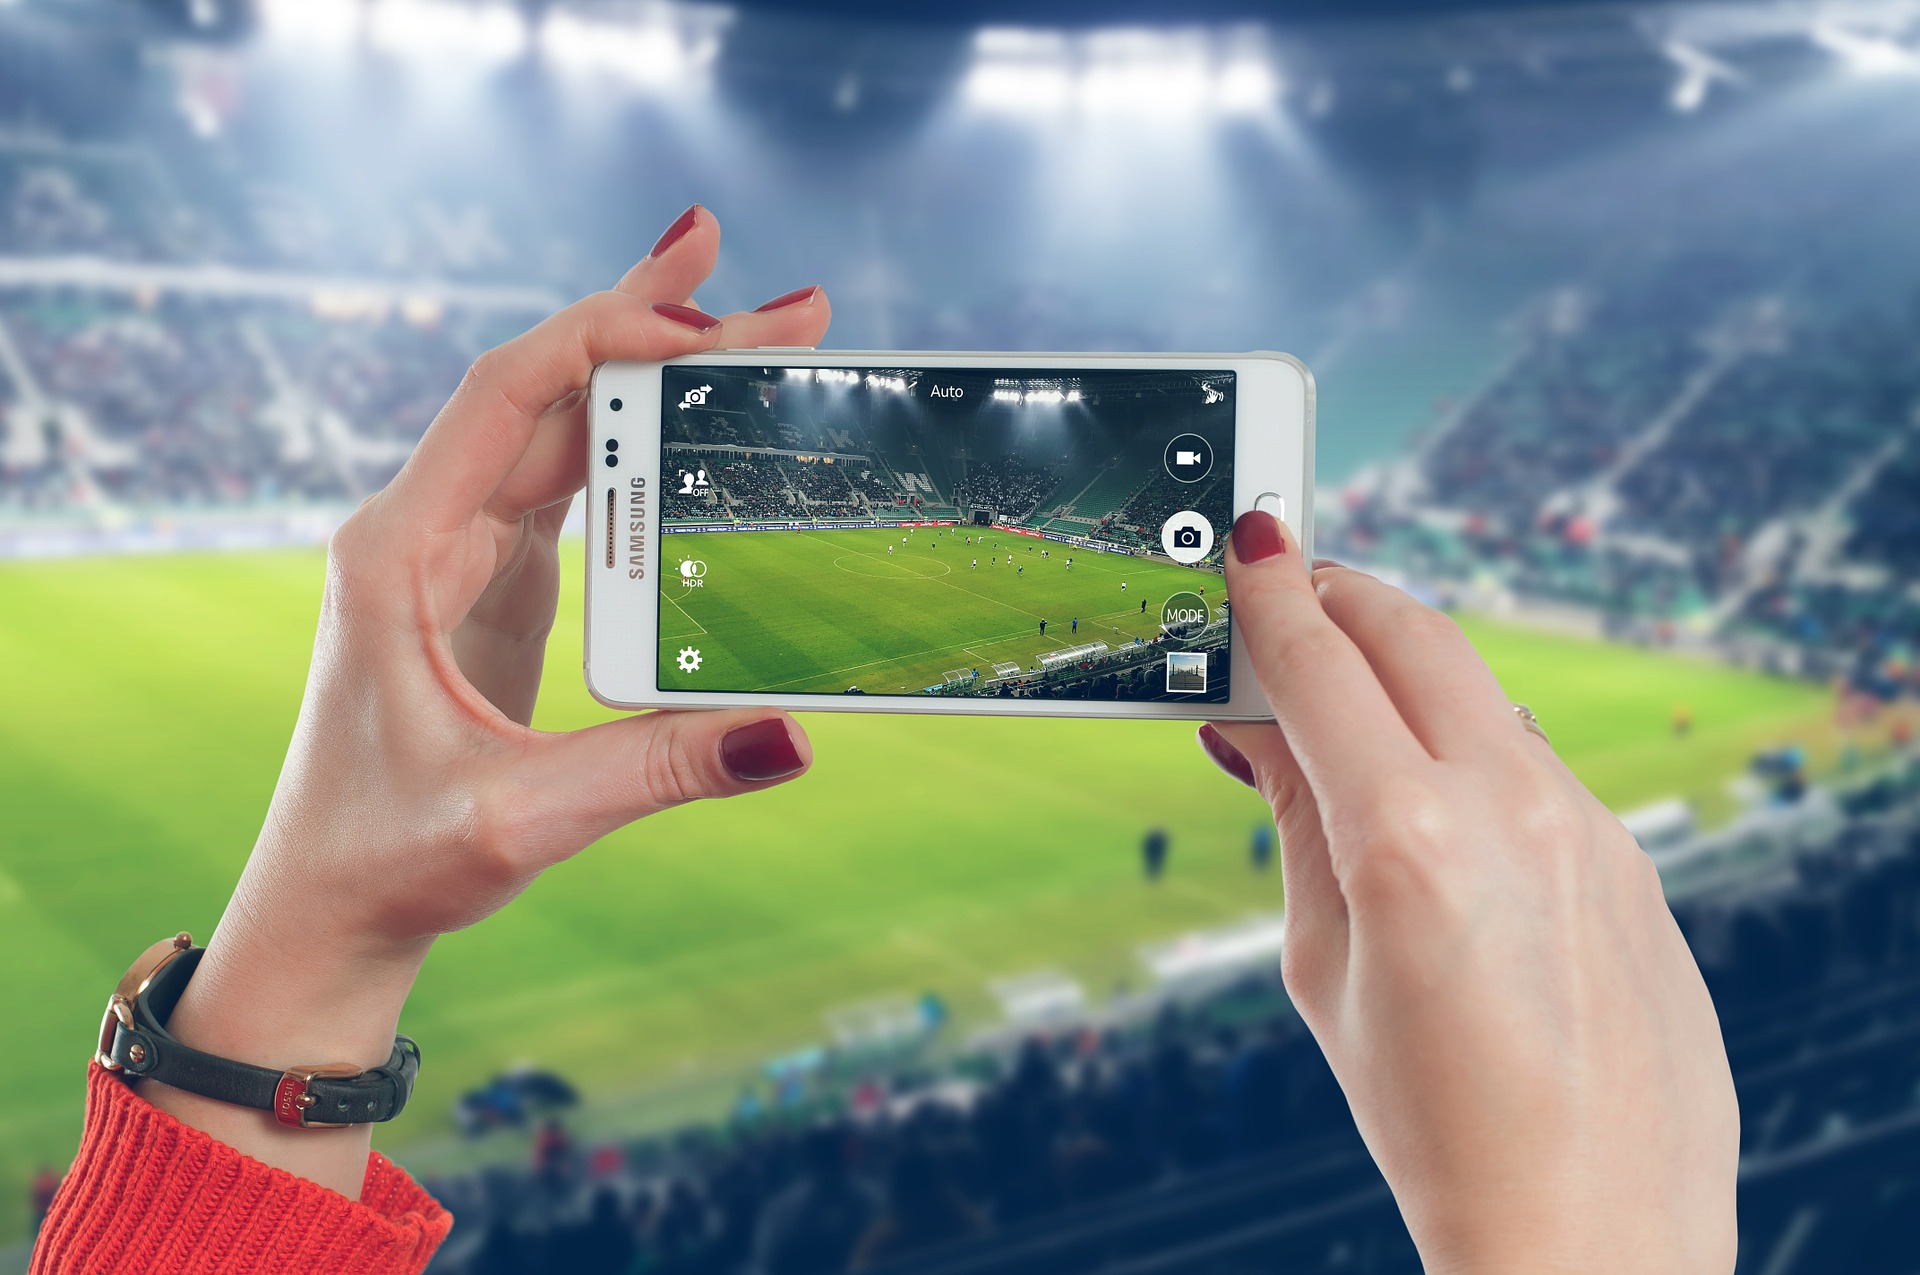 Technology Brings Fans to the Game